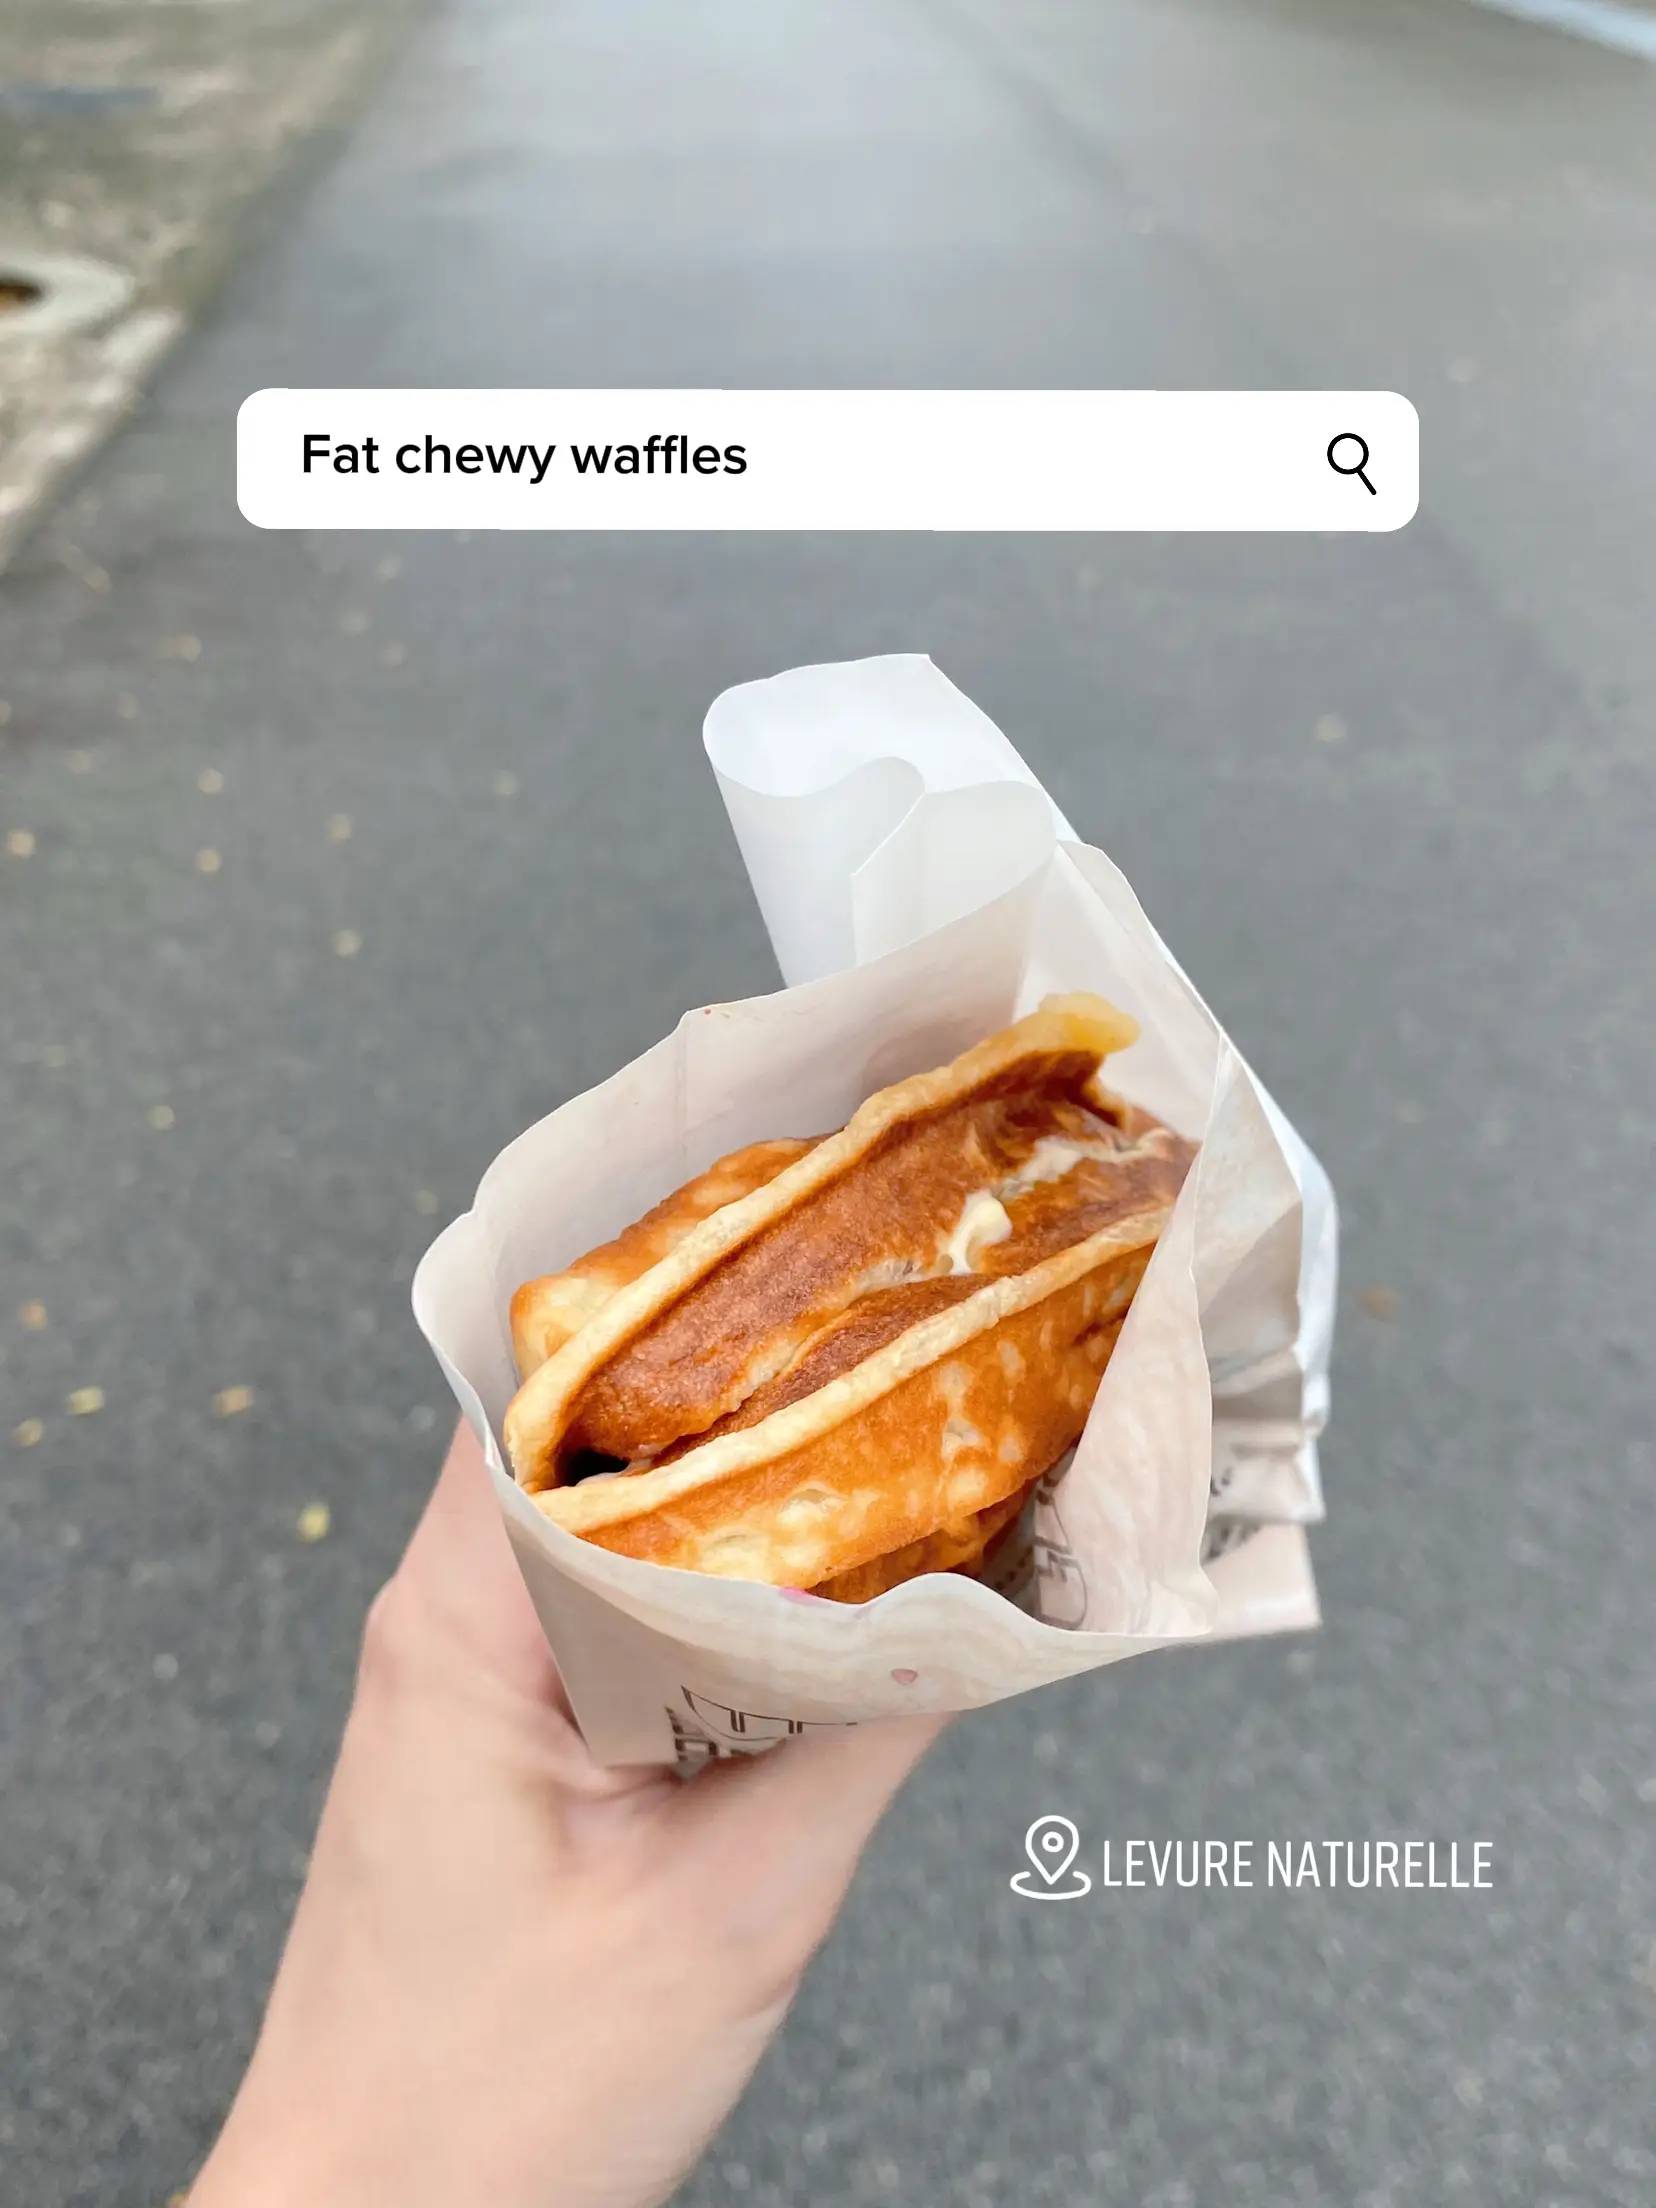 FOUND IN SG: FLUFFIEST WAFFLES 🧇 's images(0)